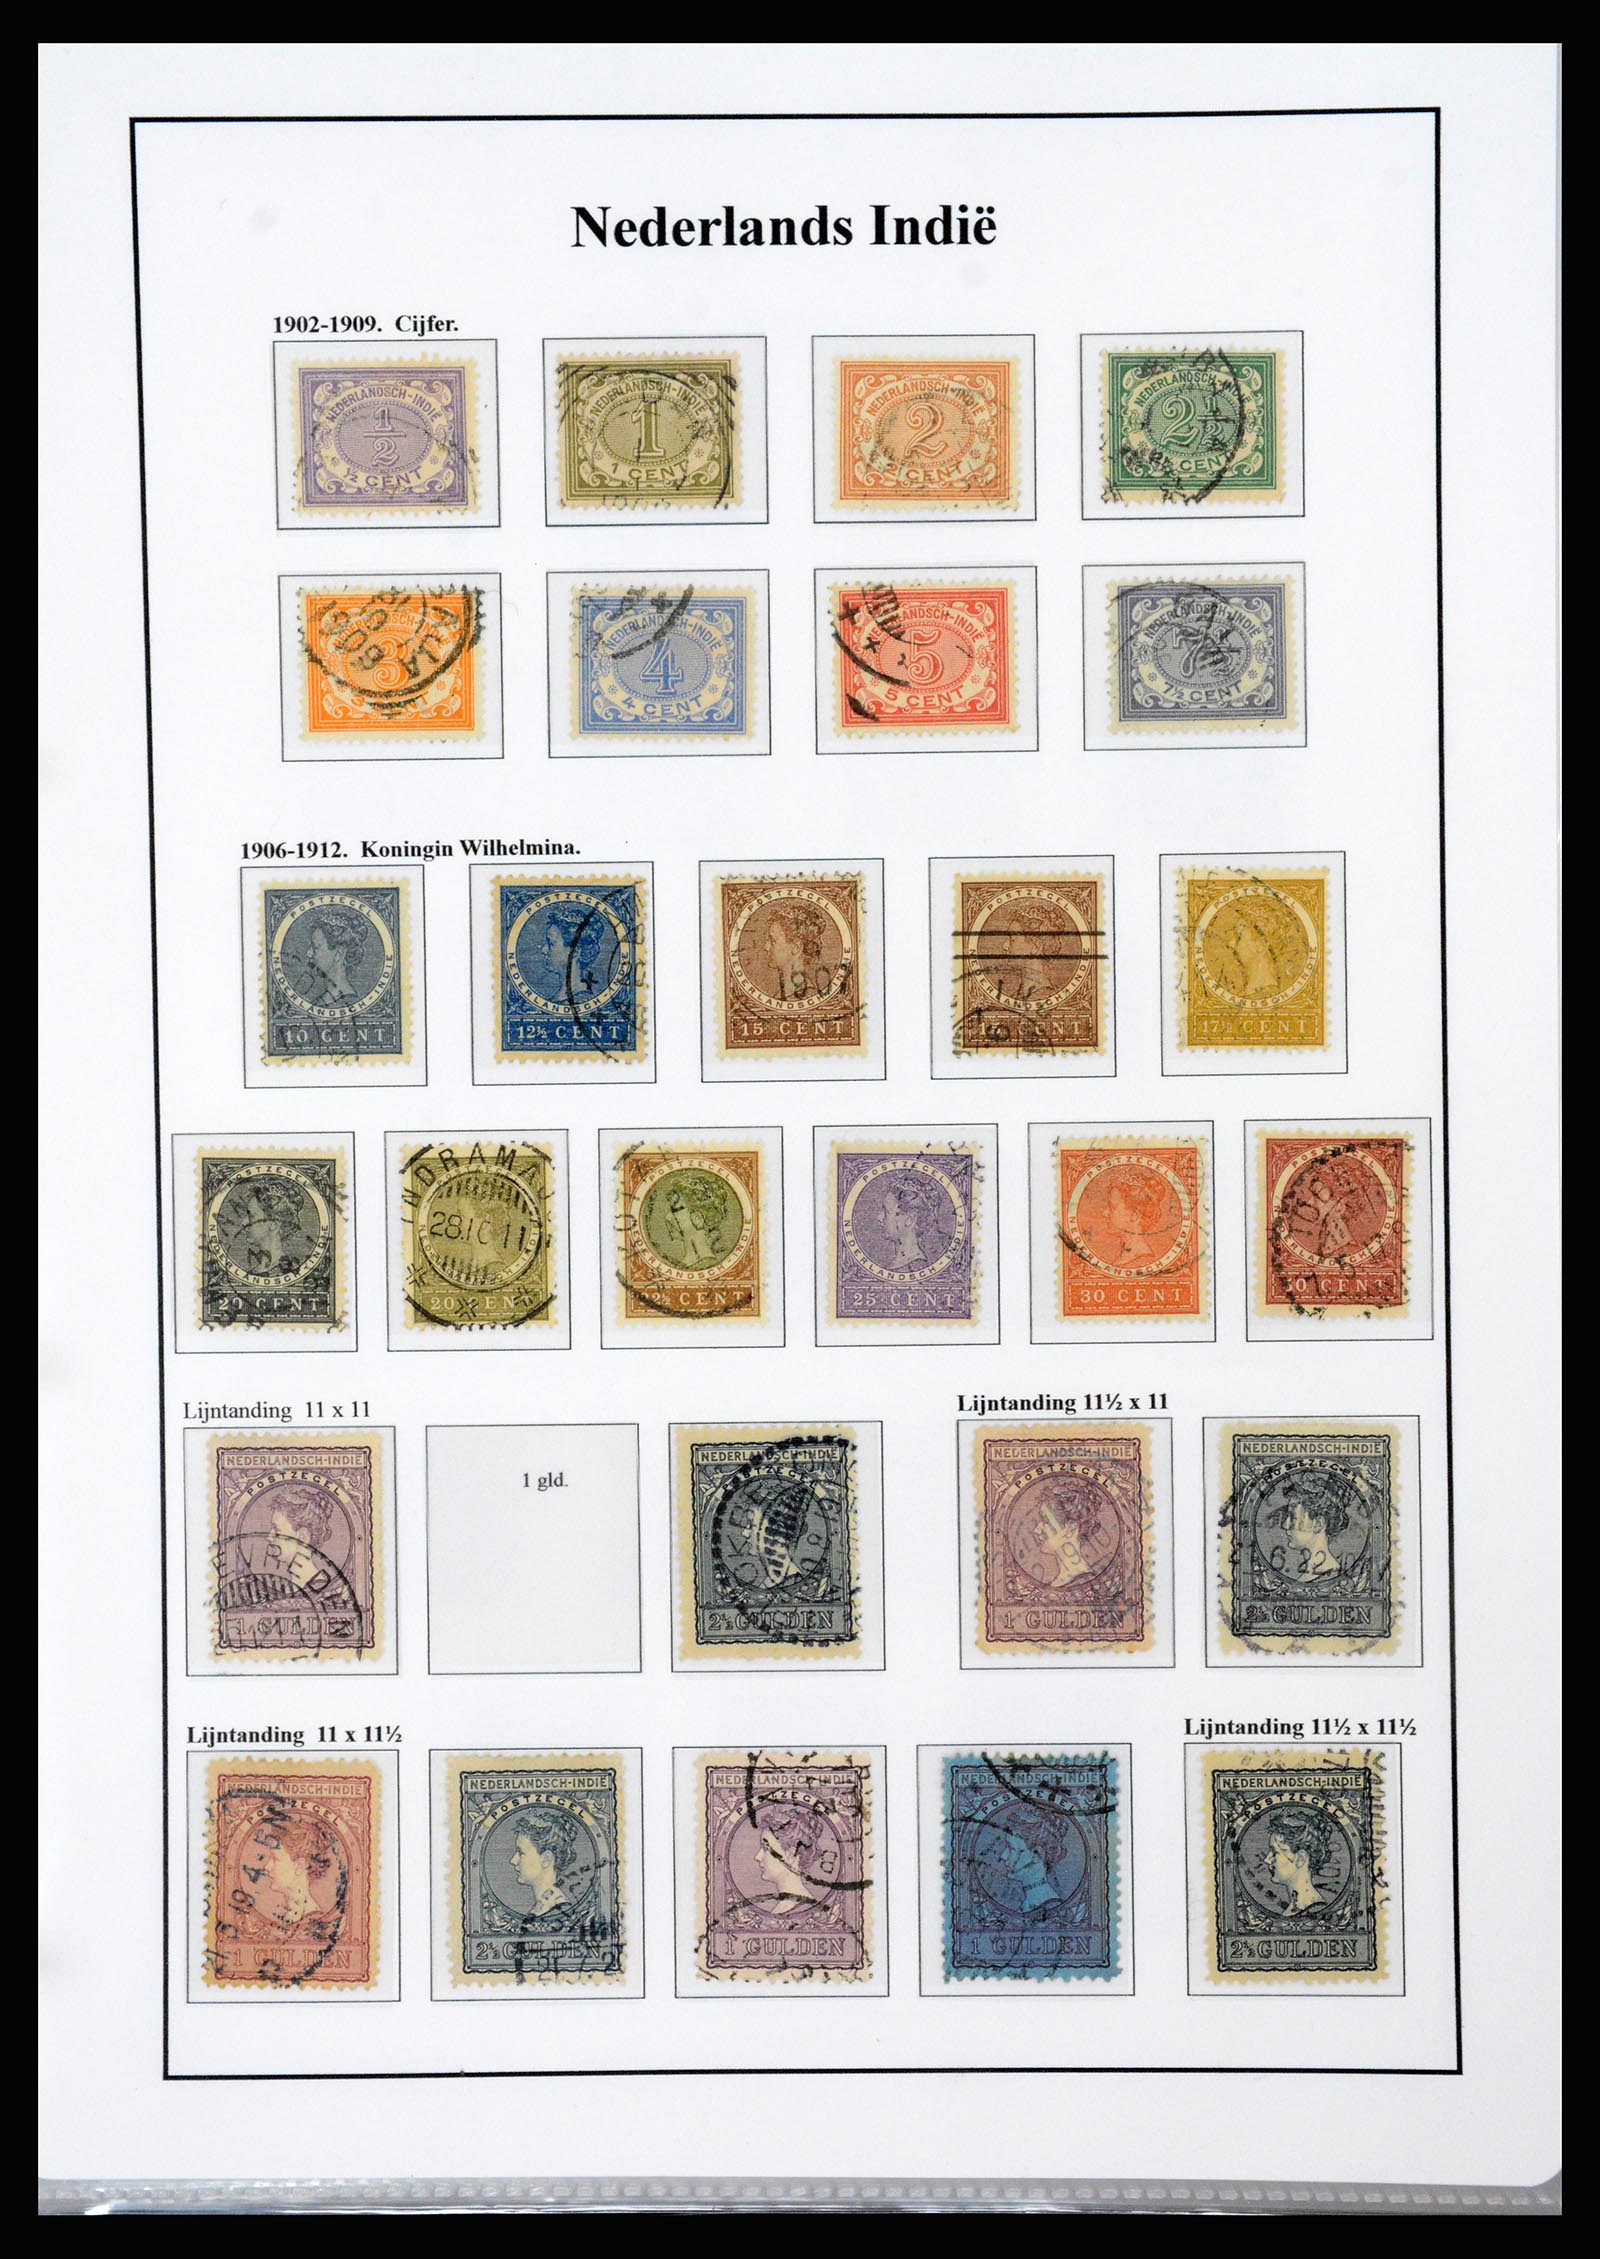 37247 006 - Stamp collection 37247 Dutch east Indies 1864-1949.